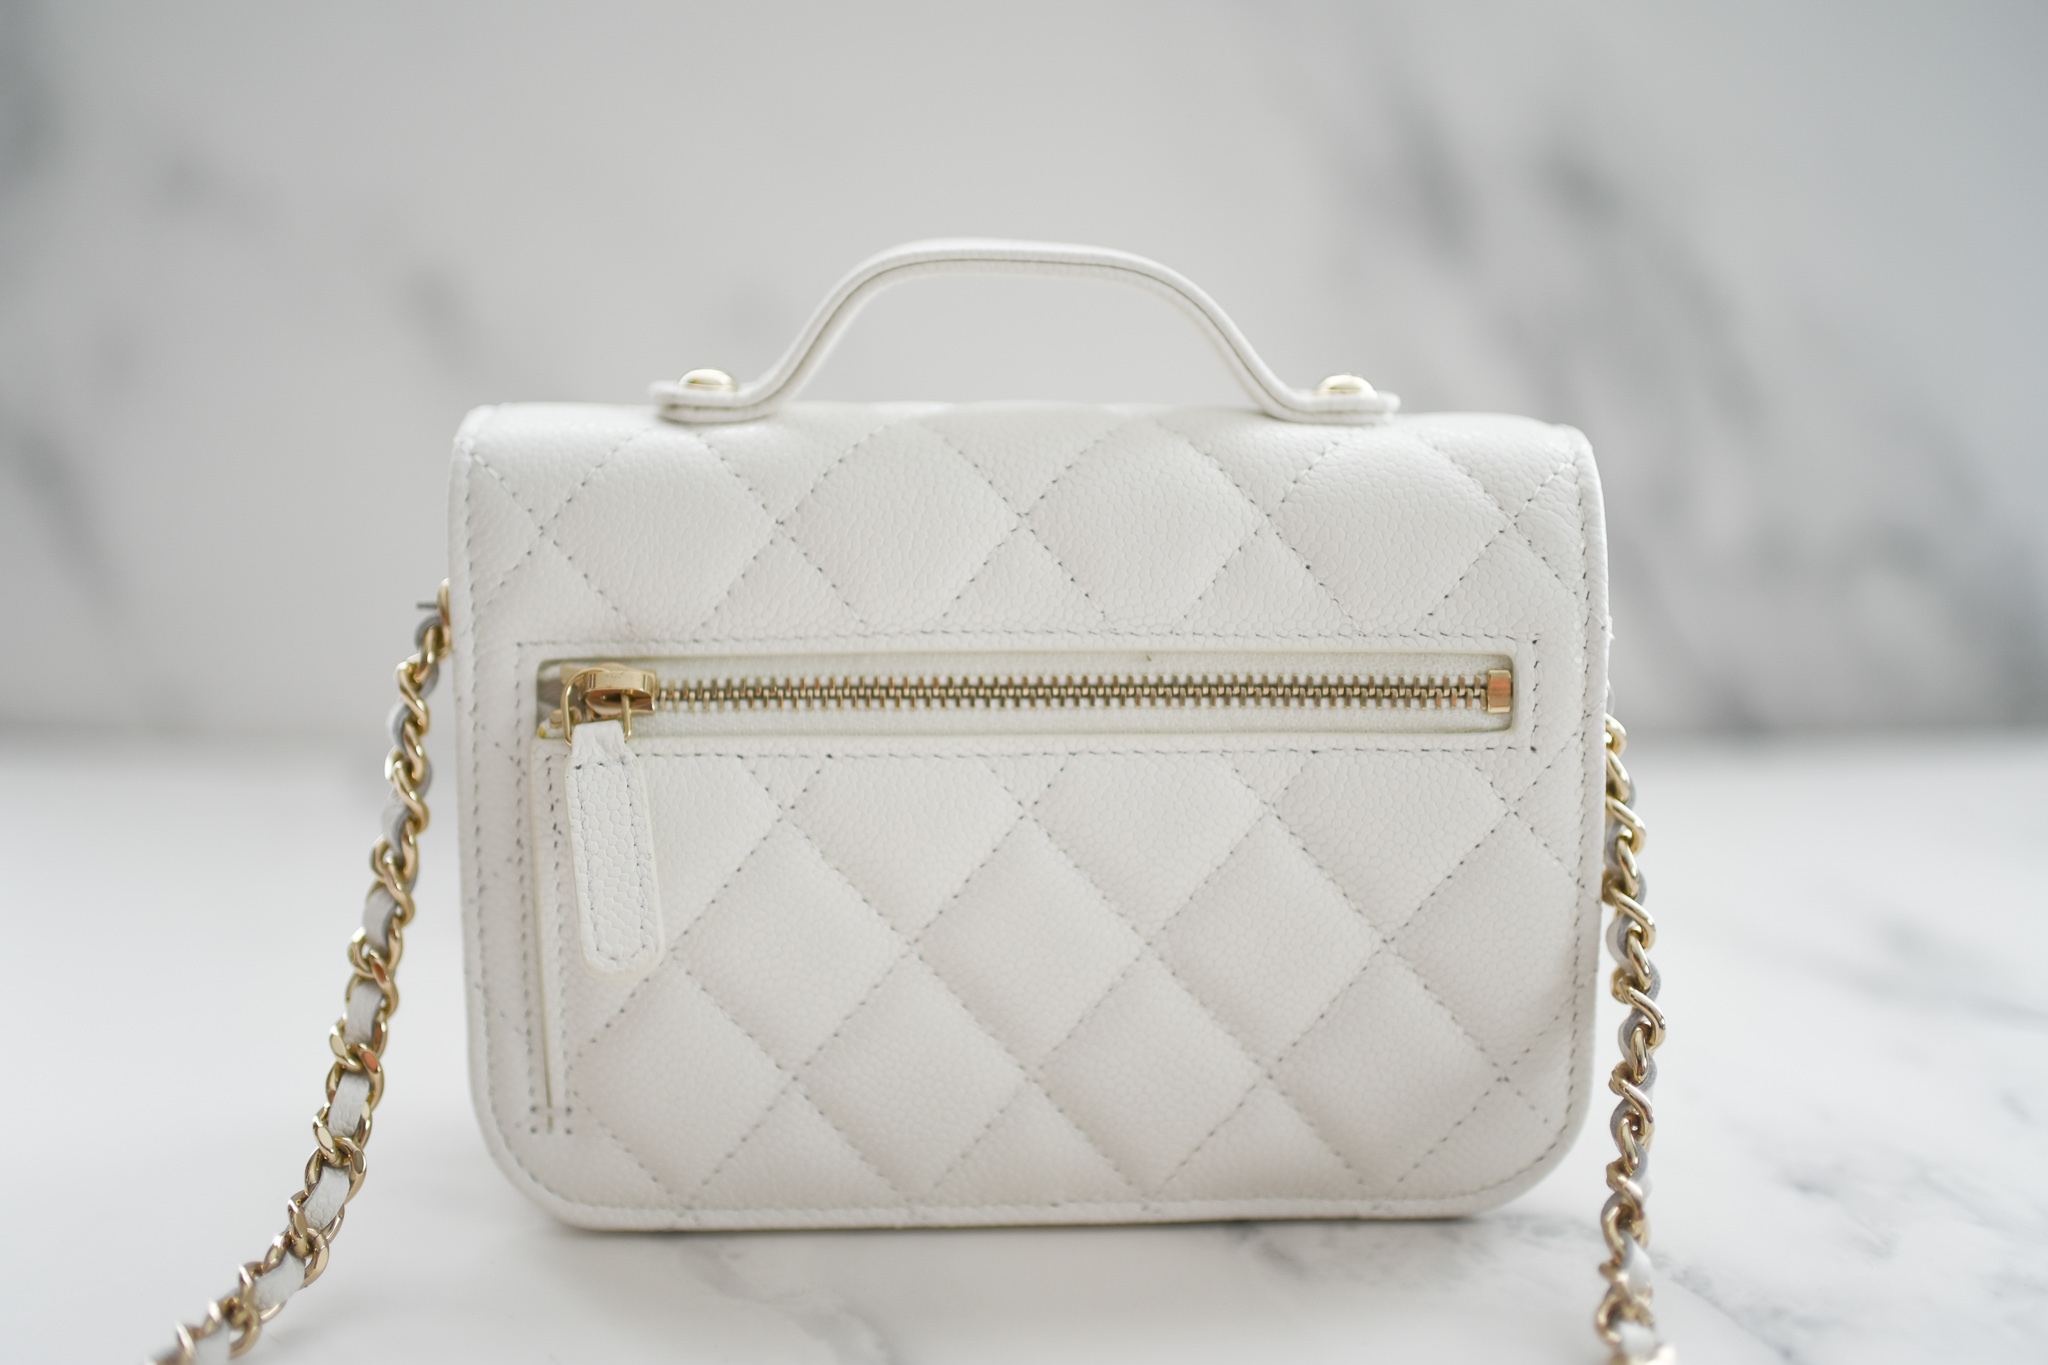 Chanel Business Affinity Clutch with Chain, White Caviar Leather with Gold  Hardware, New in Box WA001 - Julia Rose Boston